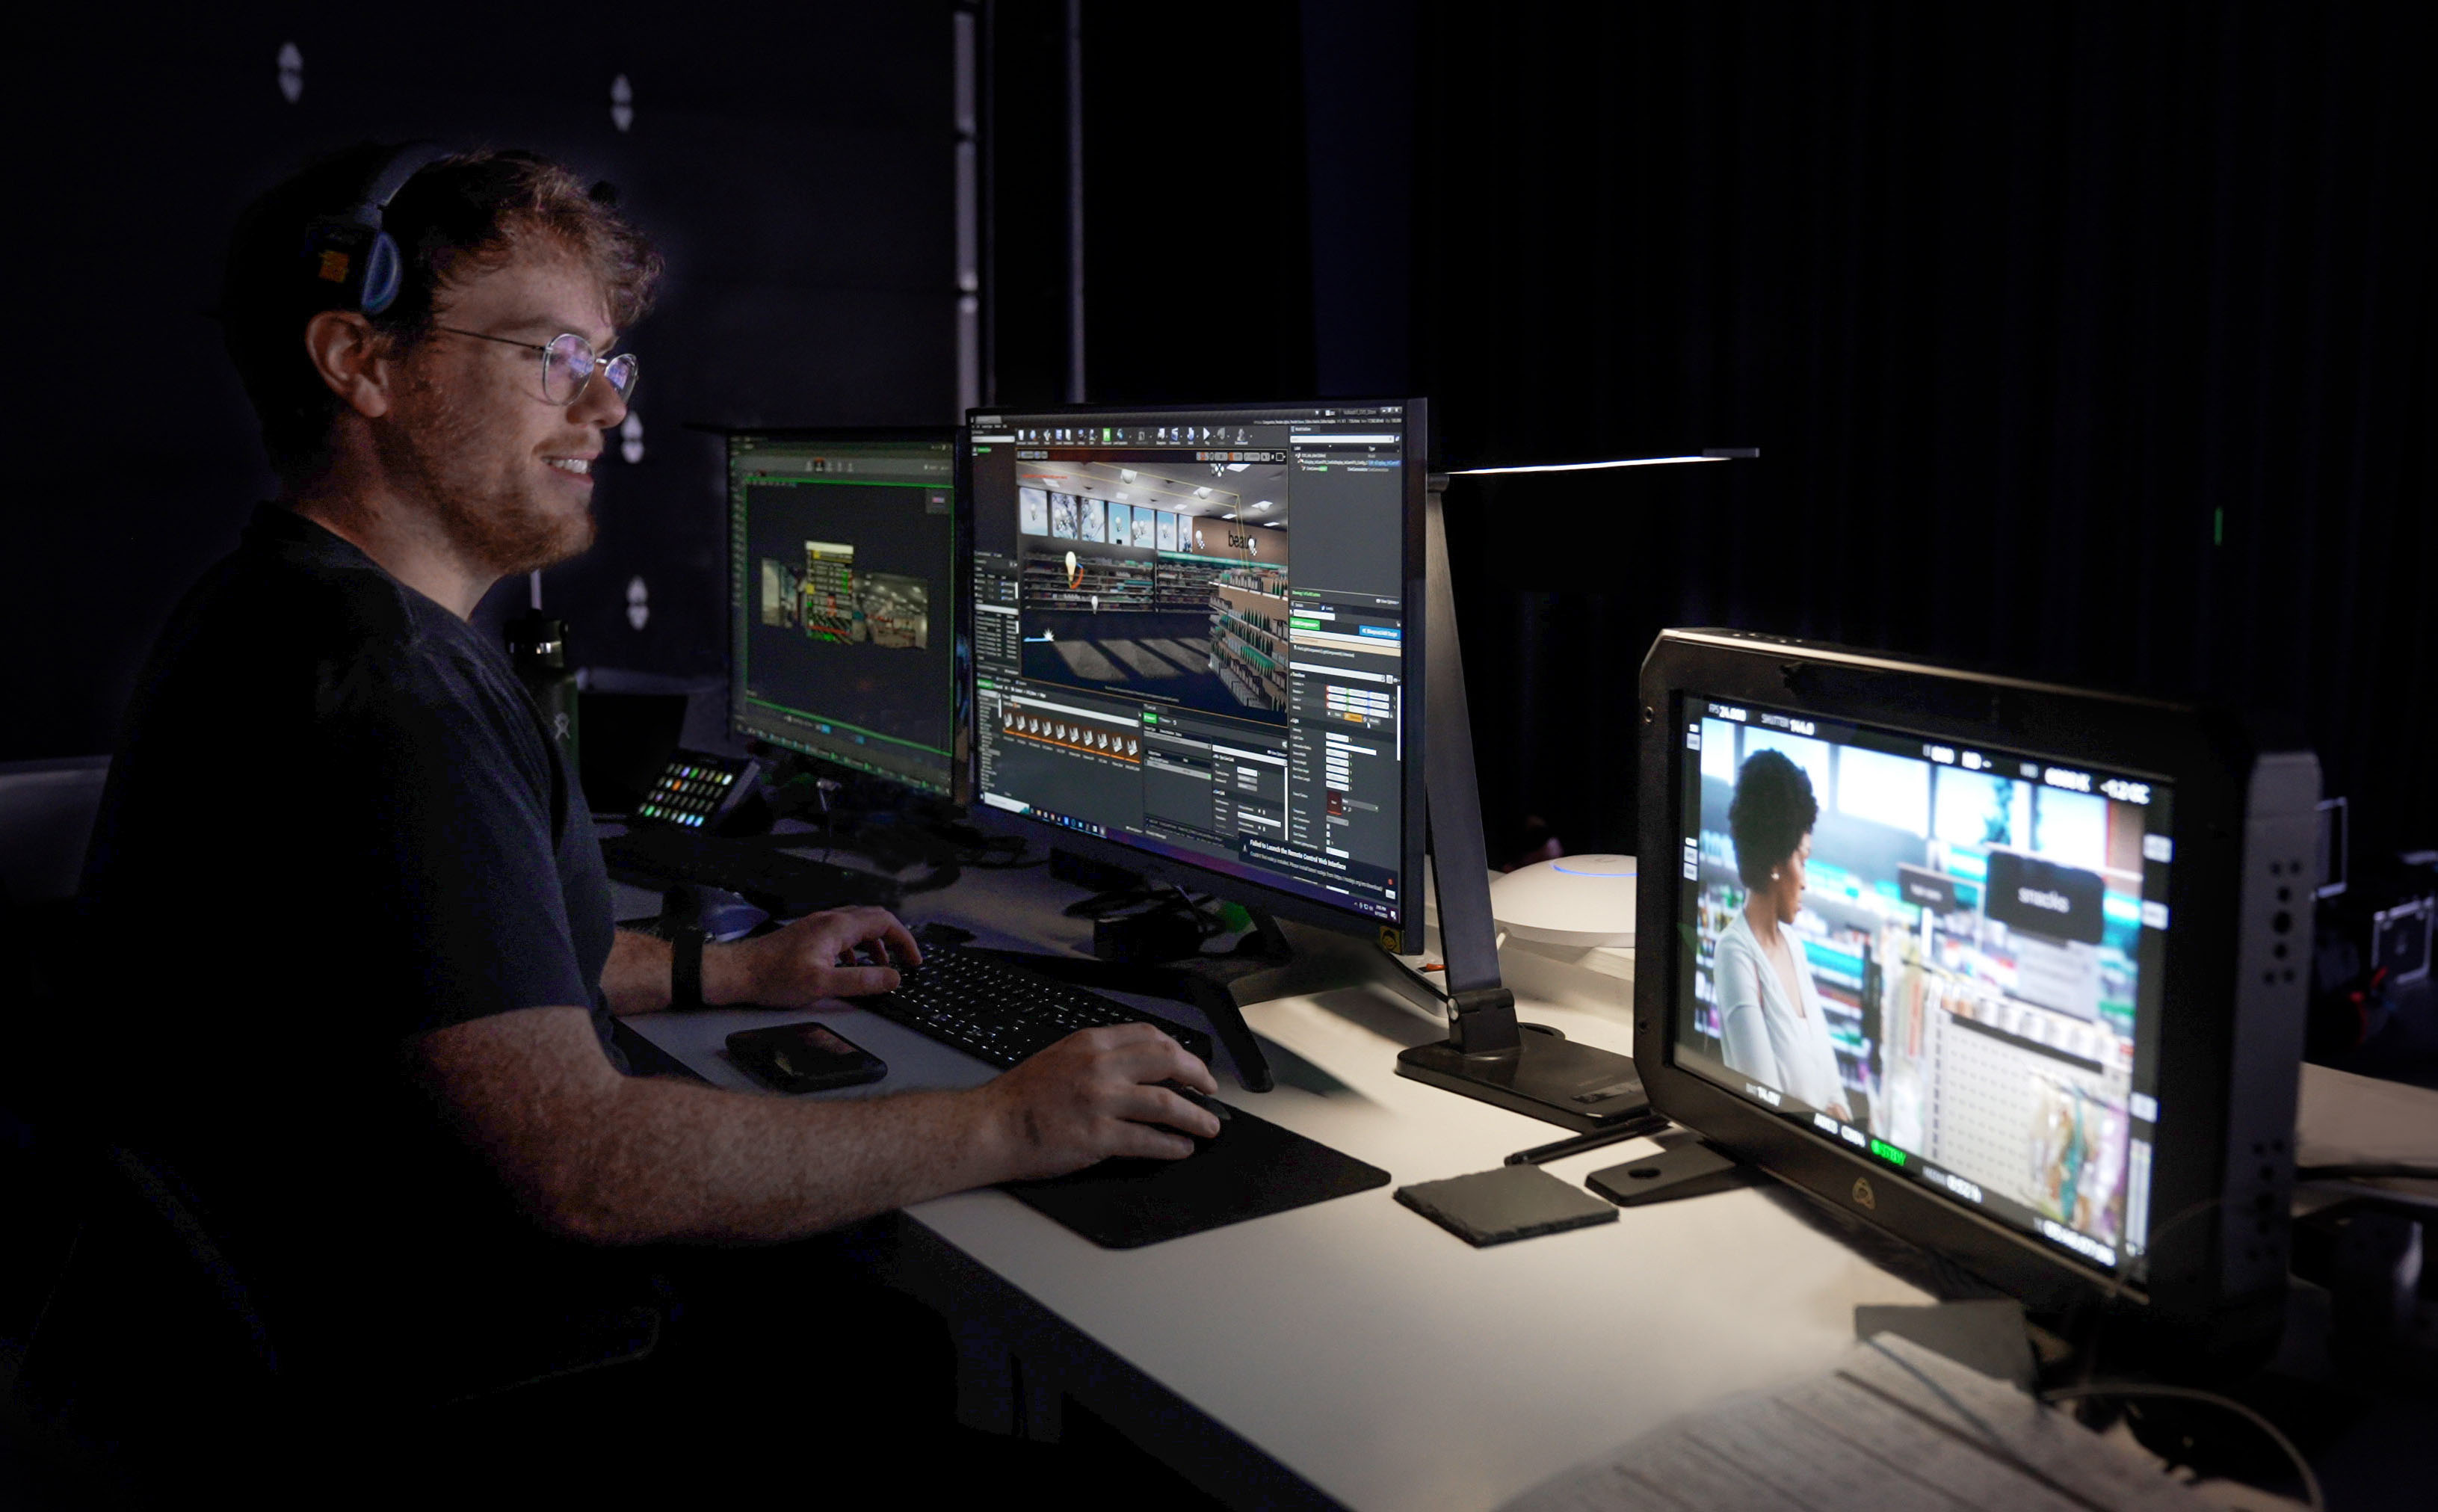 A behind-the-scenes look of the video team using Virtual Production software.